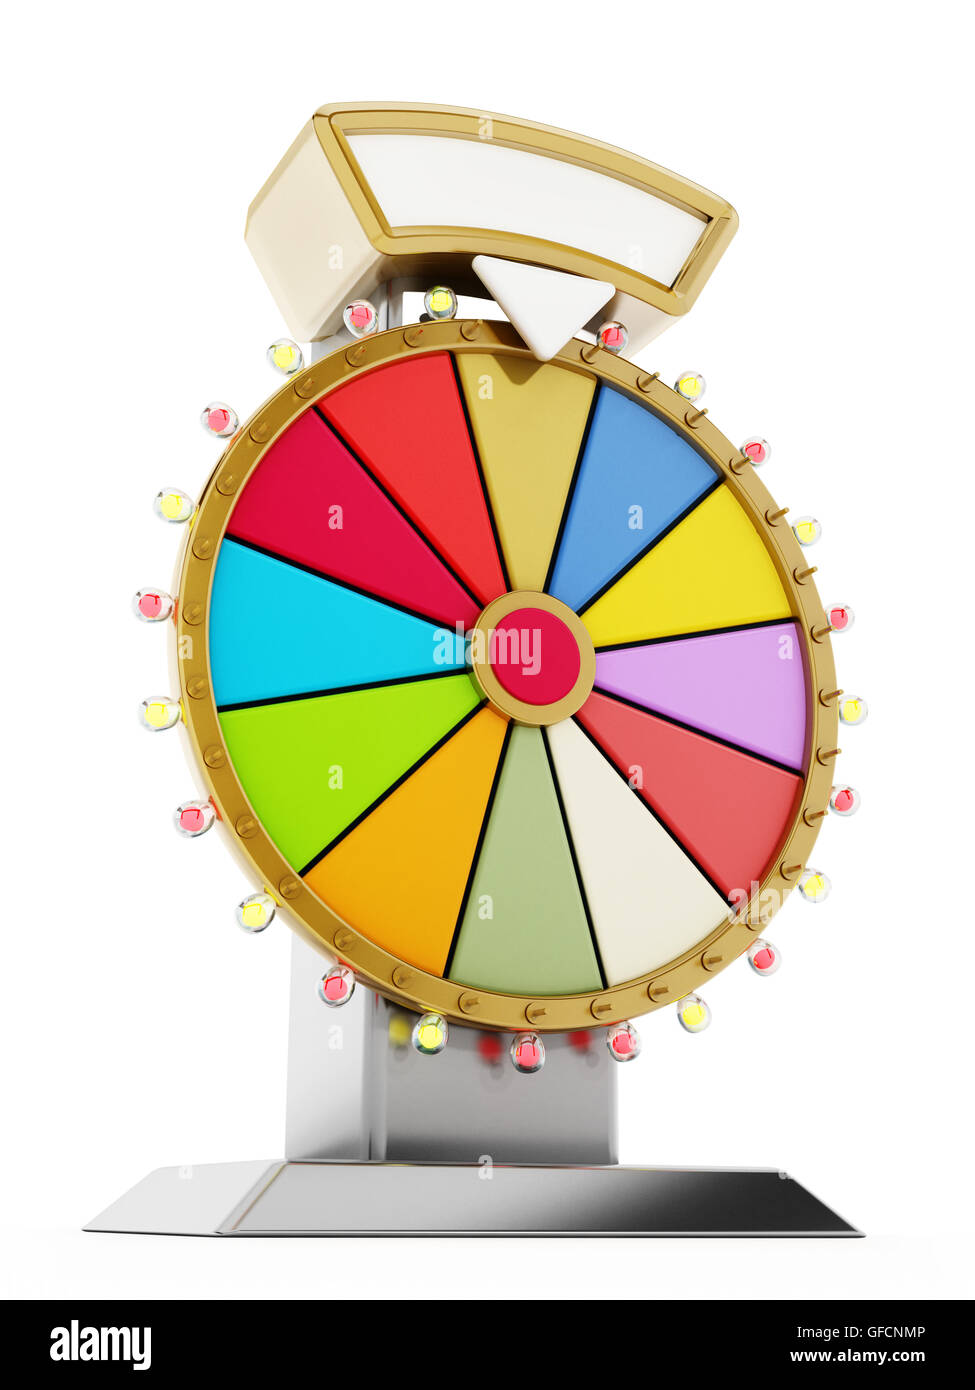 Wheel of fortune isolated on white background. 3D illustration. Stock Photo